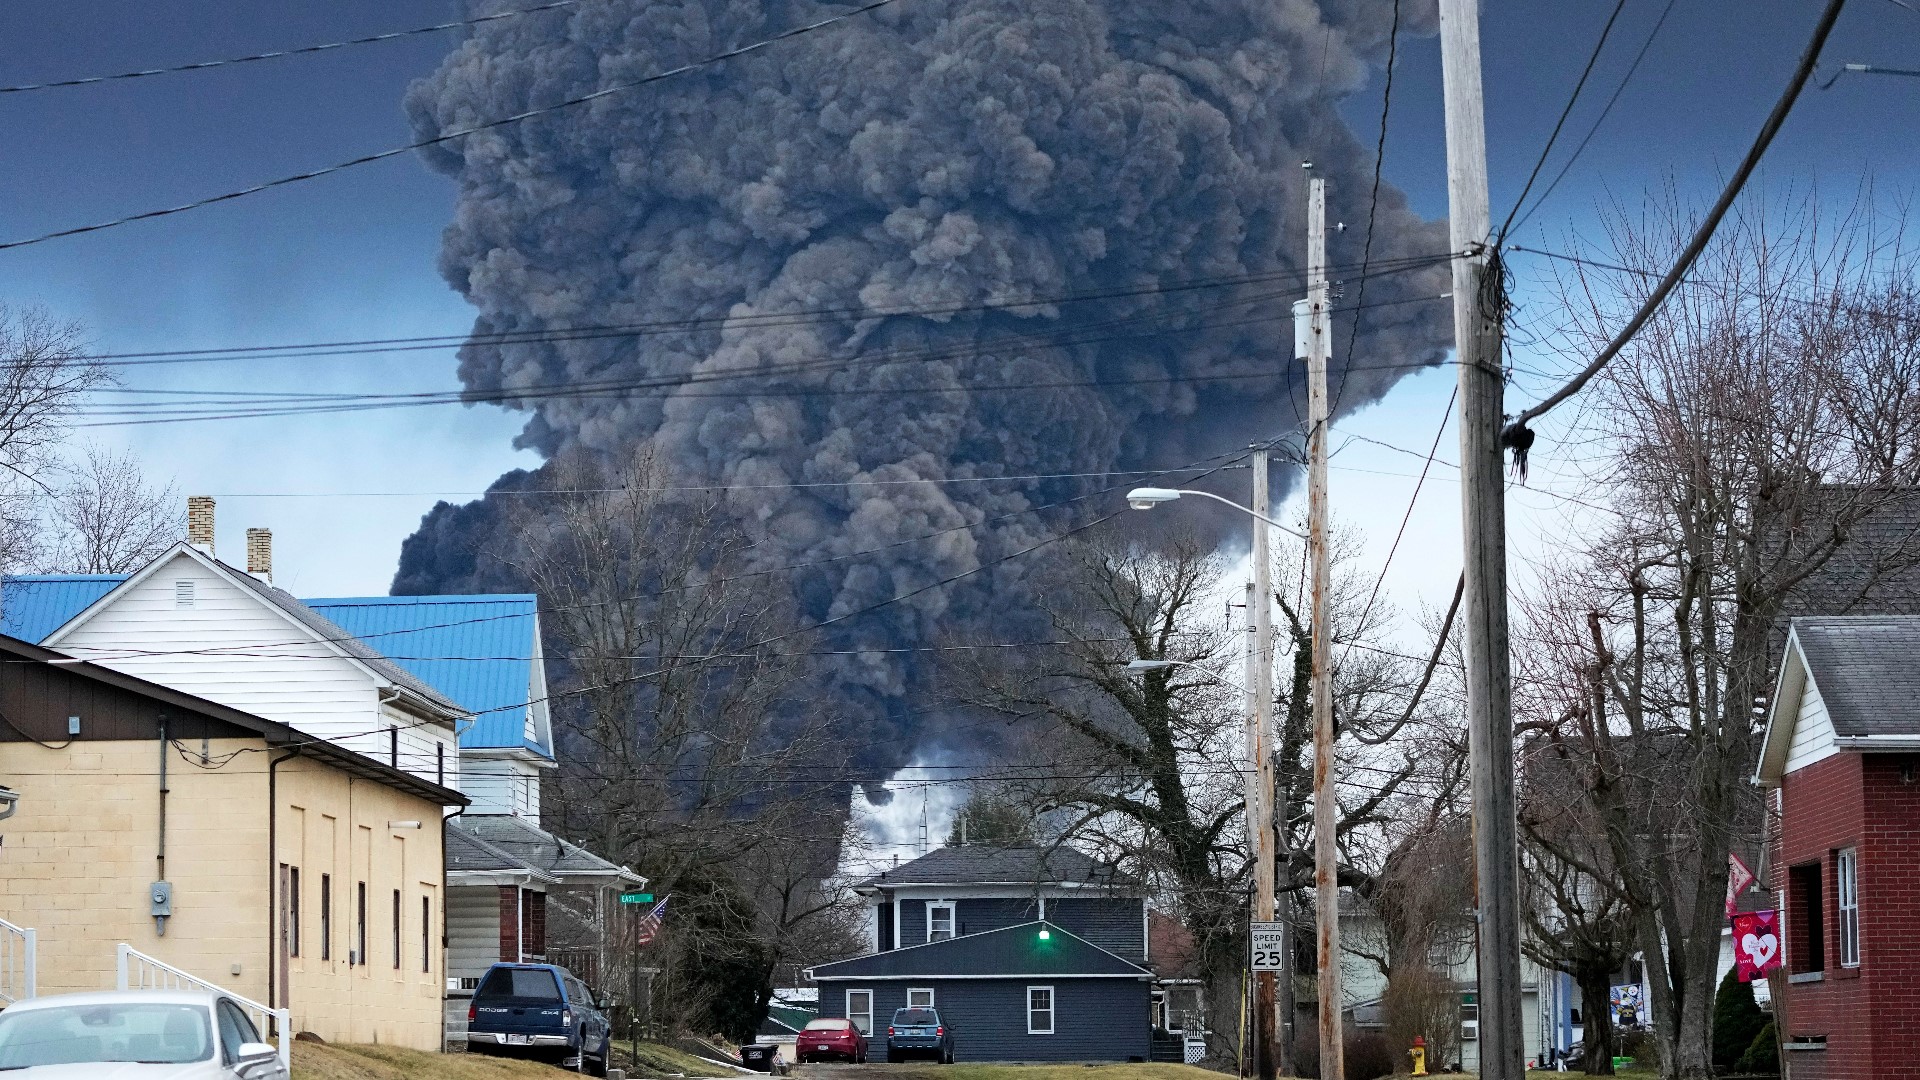 The derailment of the Norfolk Southern train has spurred concerns about long-term impacts to citizens’ health and the environment.